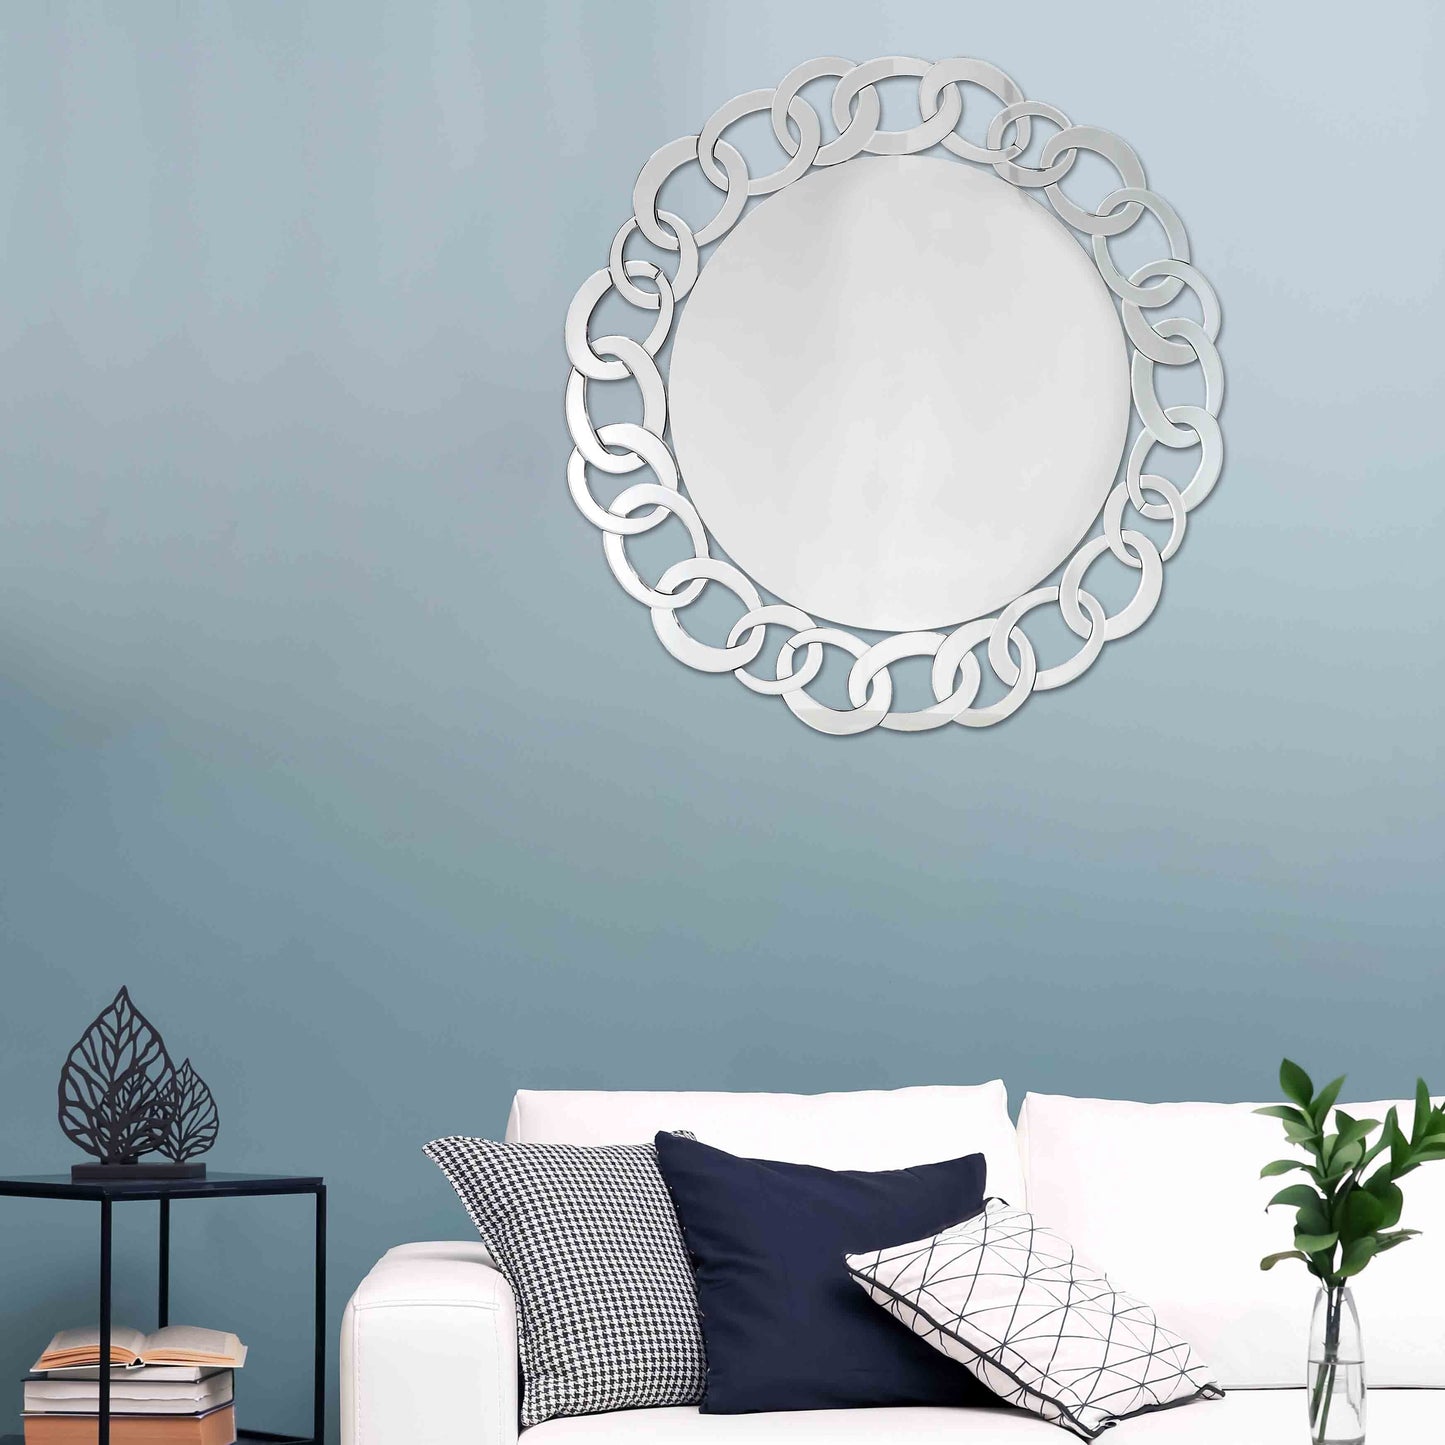 39" Mirrored Round Accent Mirror Wall Mounted With Glass Frame